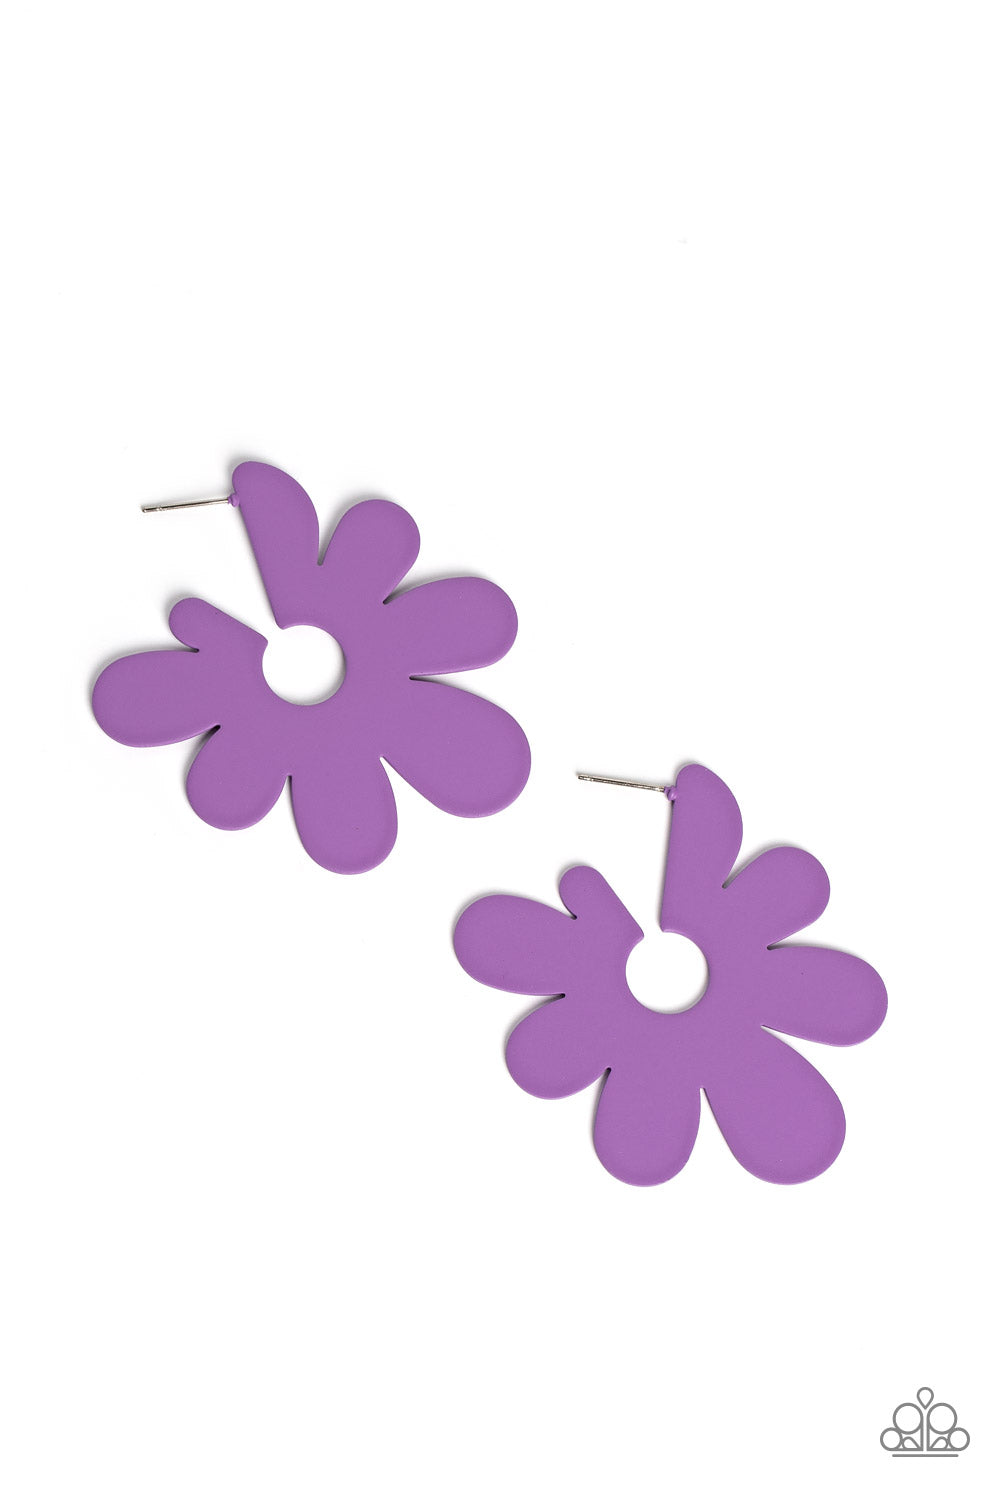 Paparazzi Accessories - Flower Power Fantasy - Purple EMP 2023 Earrings Asymmetrical, oversized purple petals bloom into an abstract flower hoop for a fashionable, attention-grabbing pop of color around the ear. Earring attaches to a standard post fitting. Hoop measures approximately 2" in diameter.  Sold as one pair of hoop earrings.